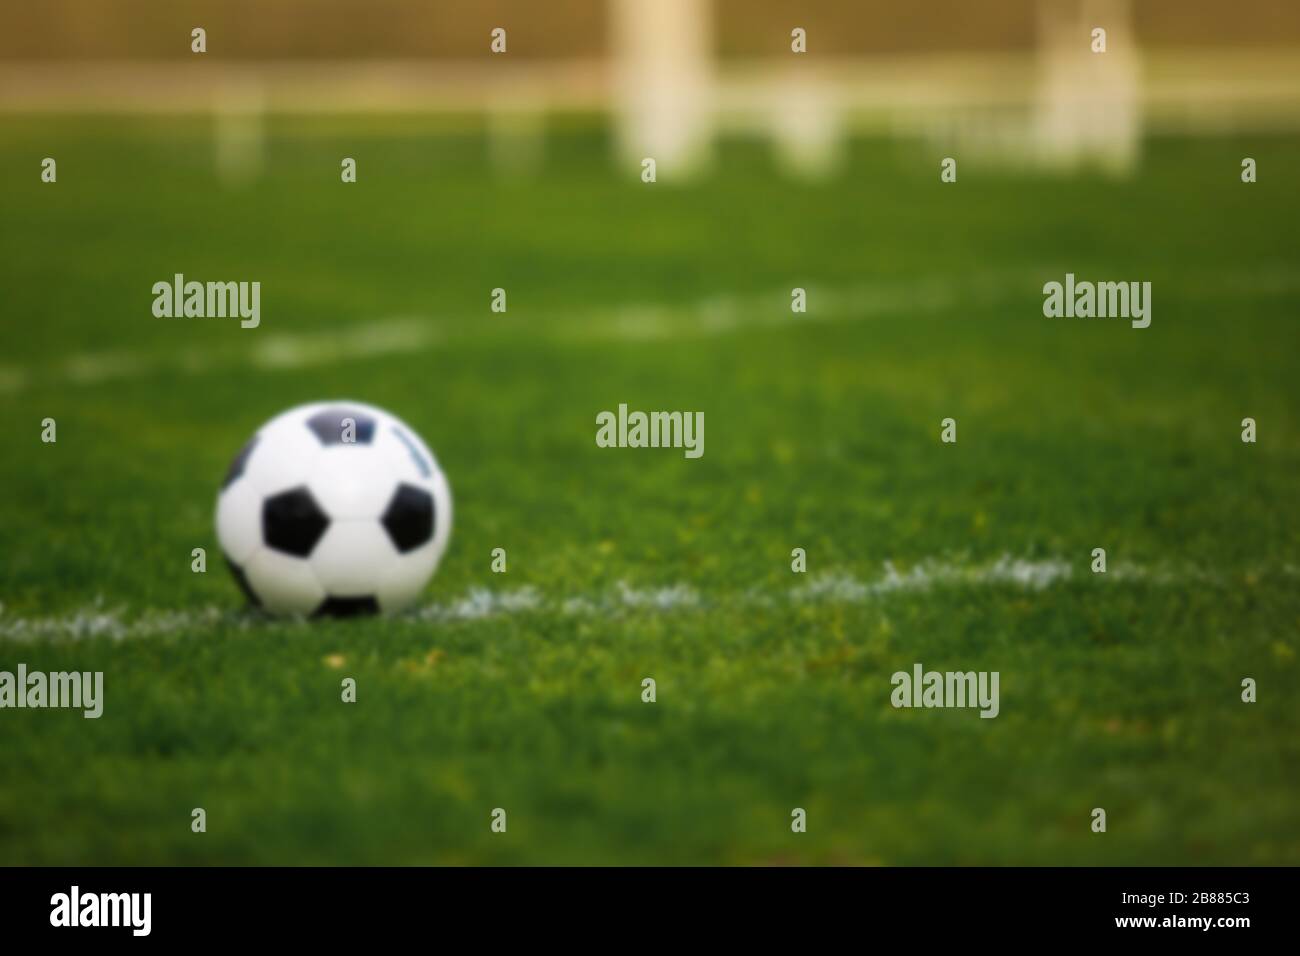 Blurred background of a Classic soccer ball, typical black and white pattern, placed on the white marking line of the stadium turf. Traditional footba Stock Photo